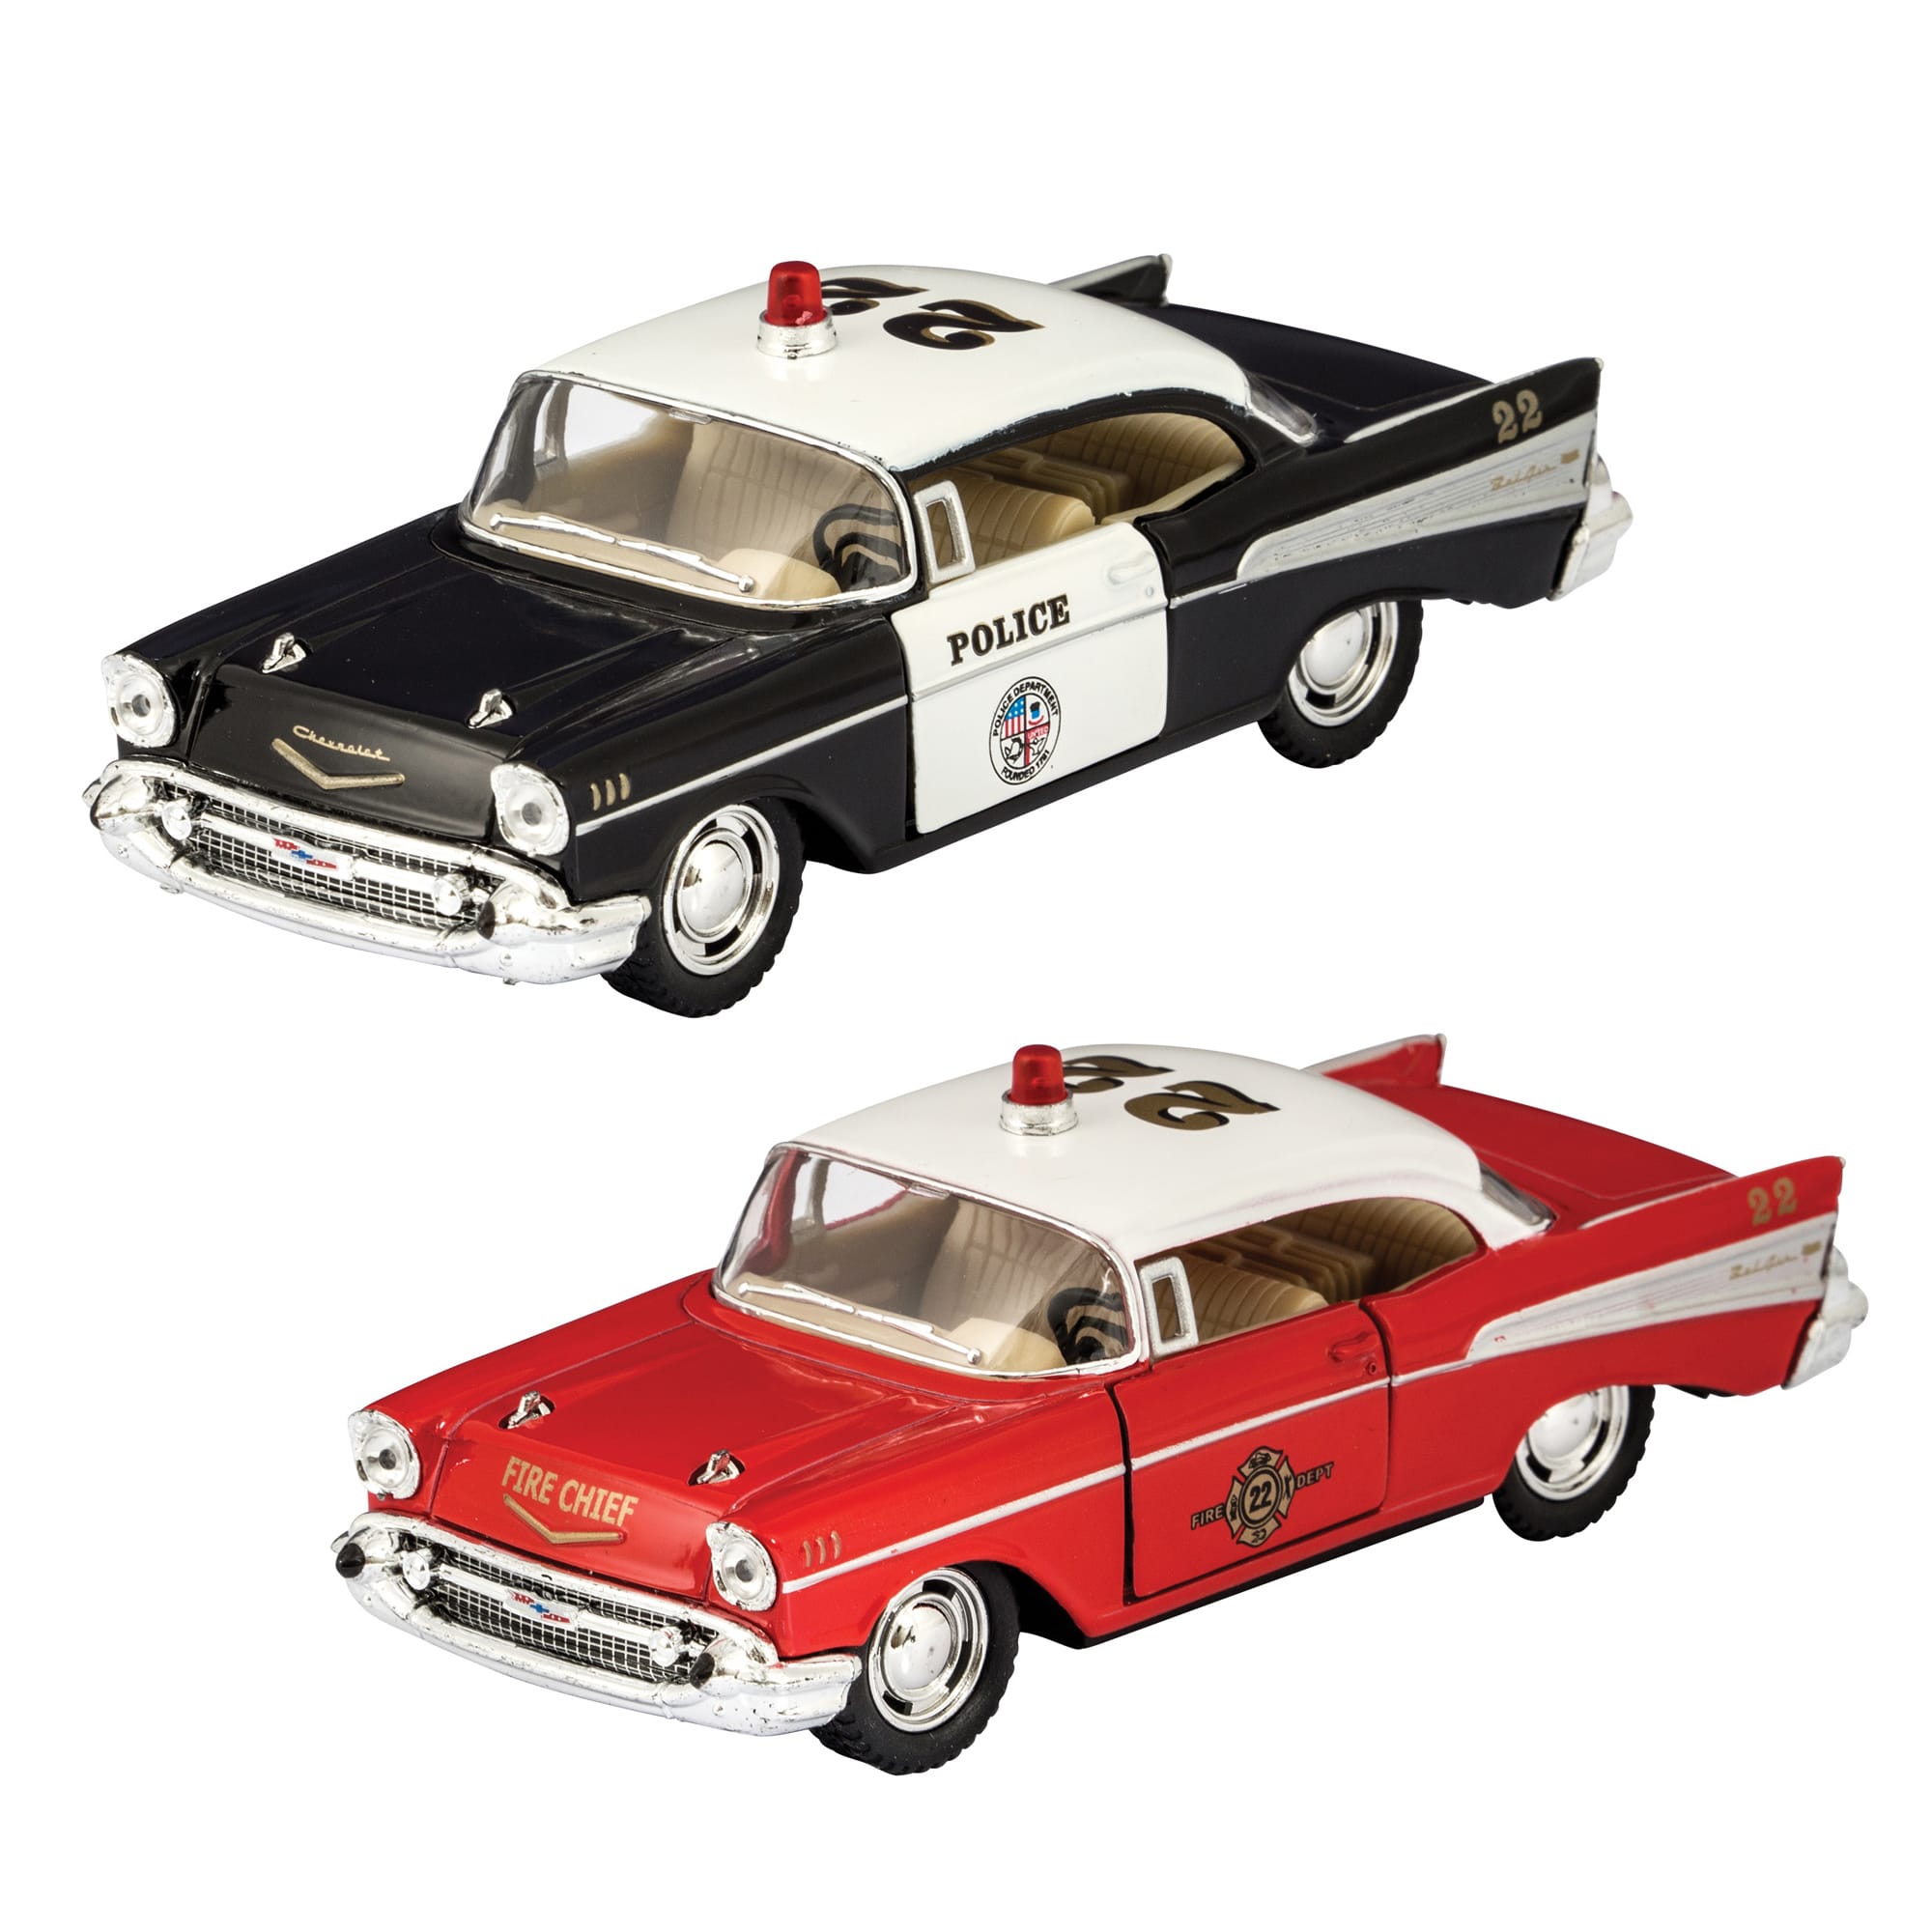 Chevy Bel Air police and fire chief cars.